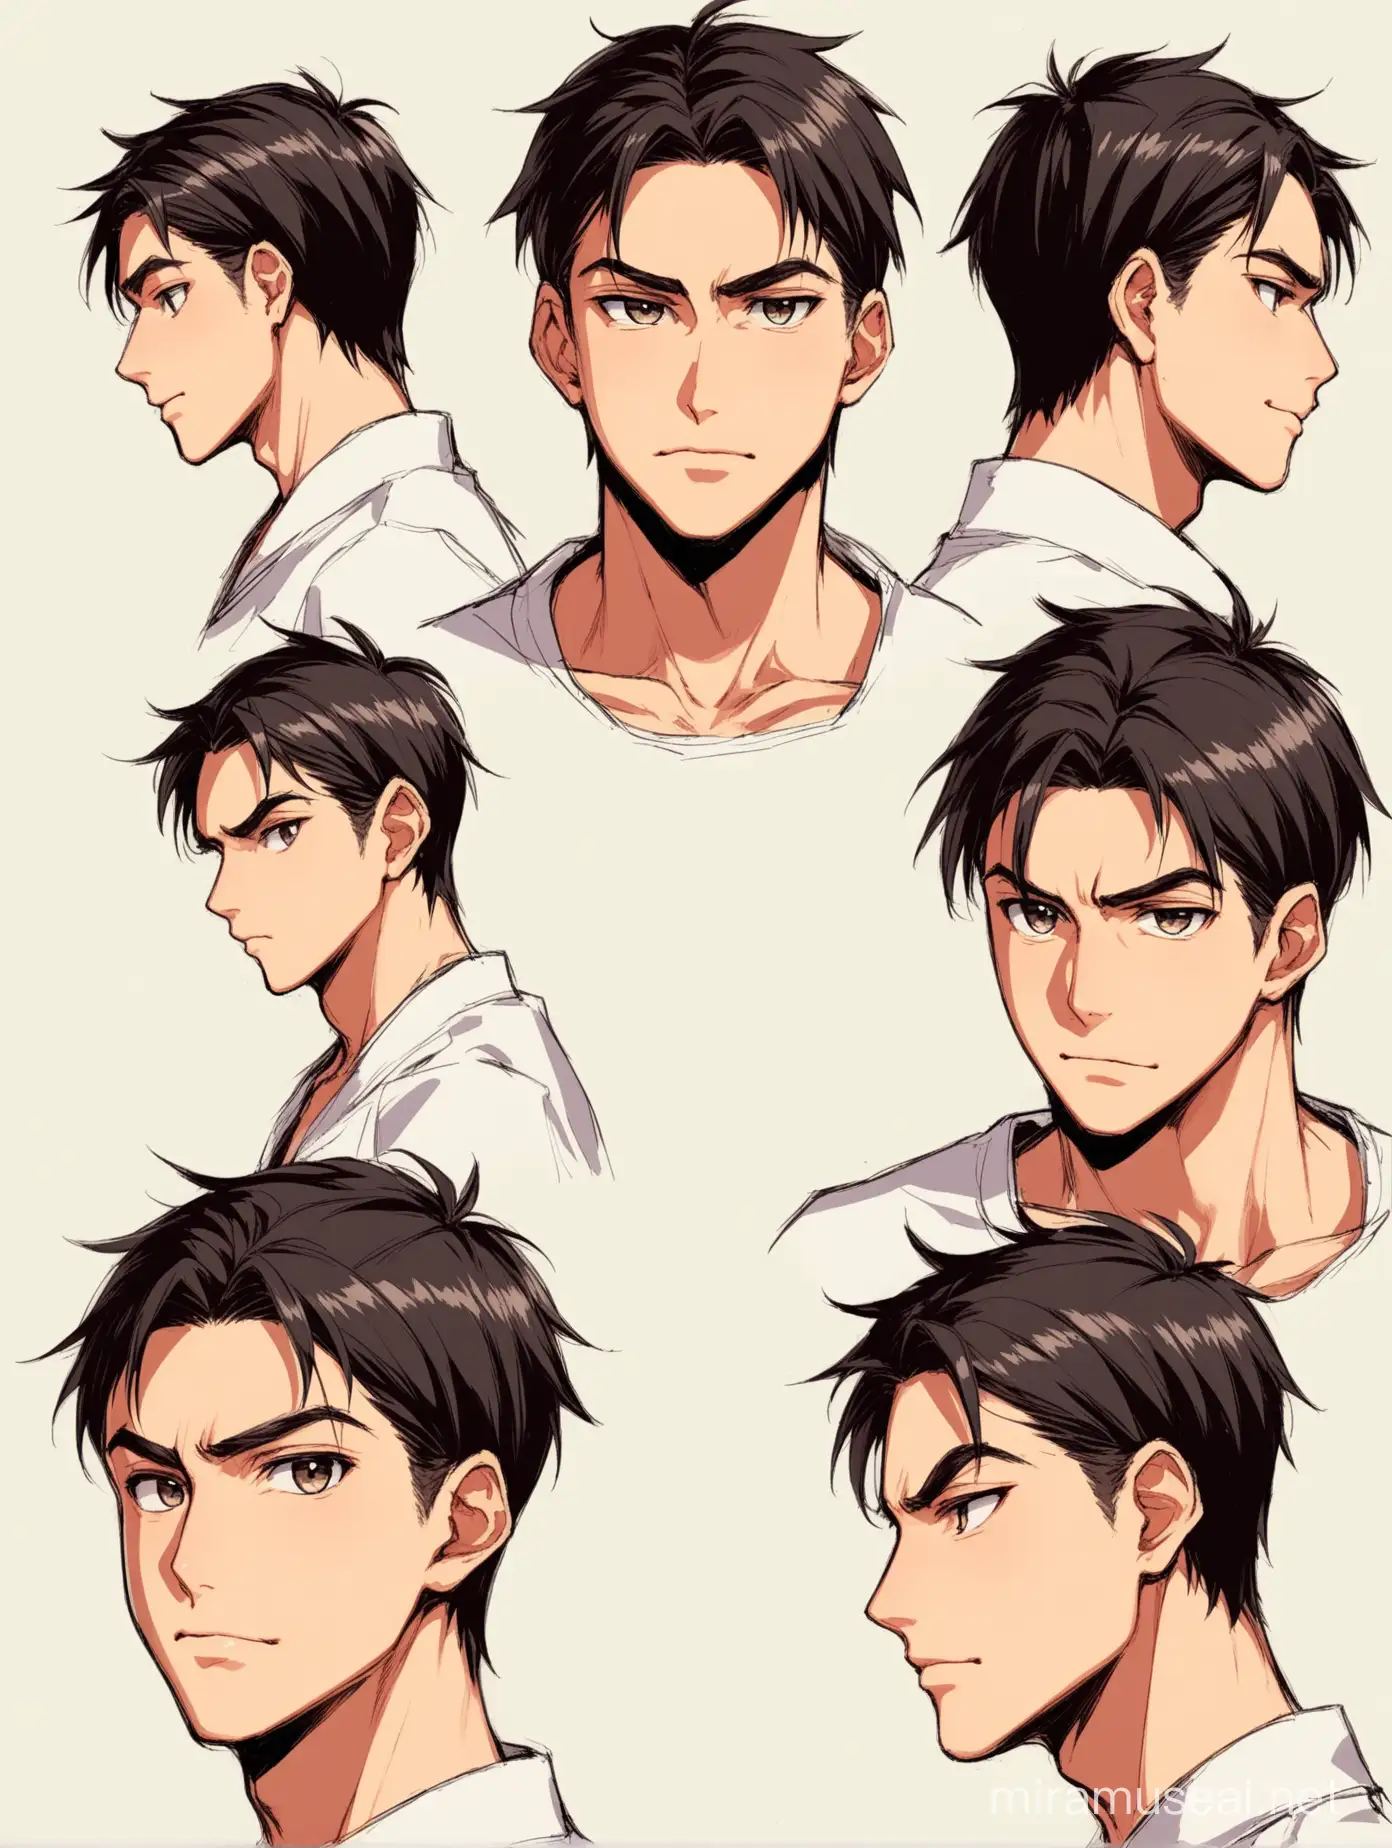 Anime Character Transformation Francis Mosses Portrayed as a Handsome Anime Man